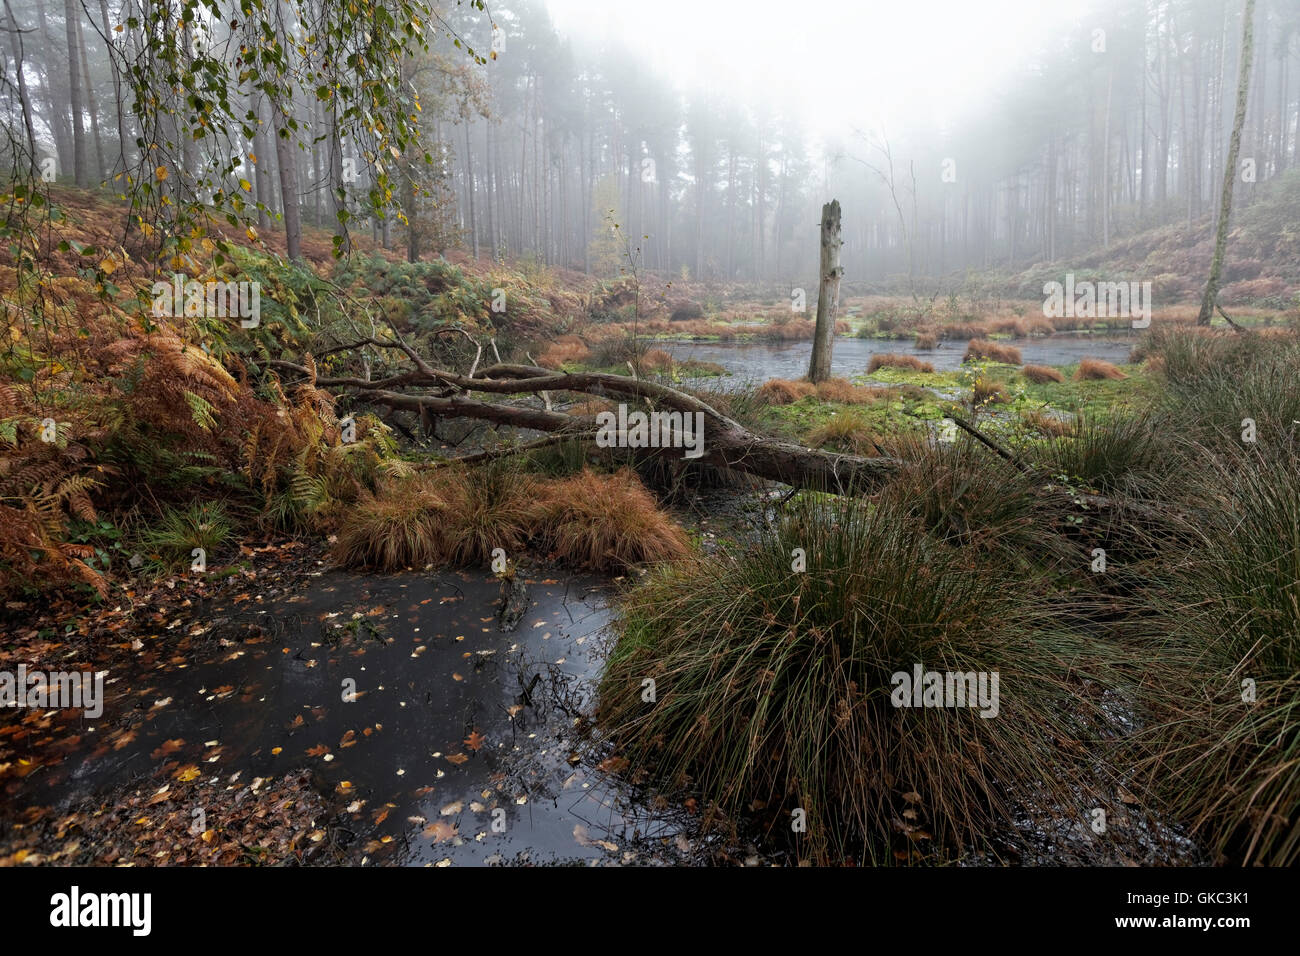 landscape, composition, trees, water, Delamere Forest, Cheshire, England, UK, Stock Photo